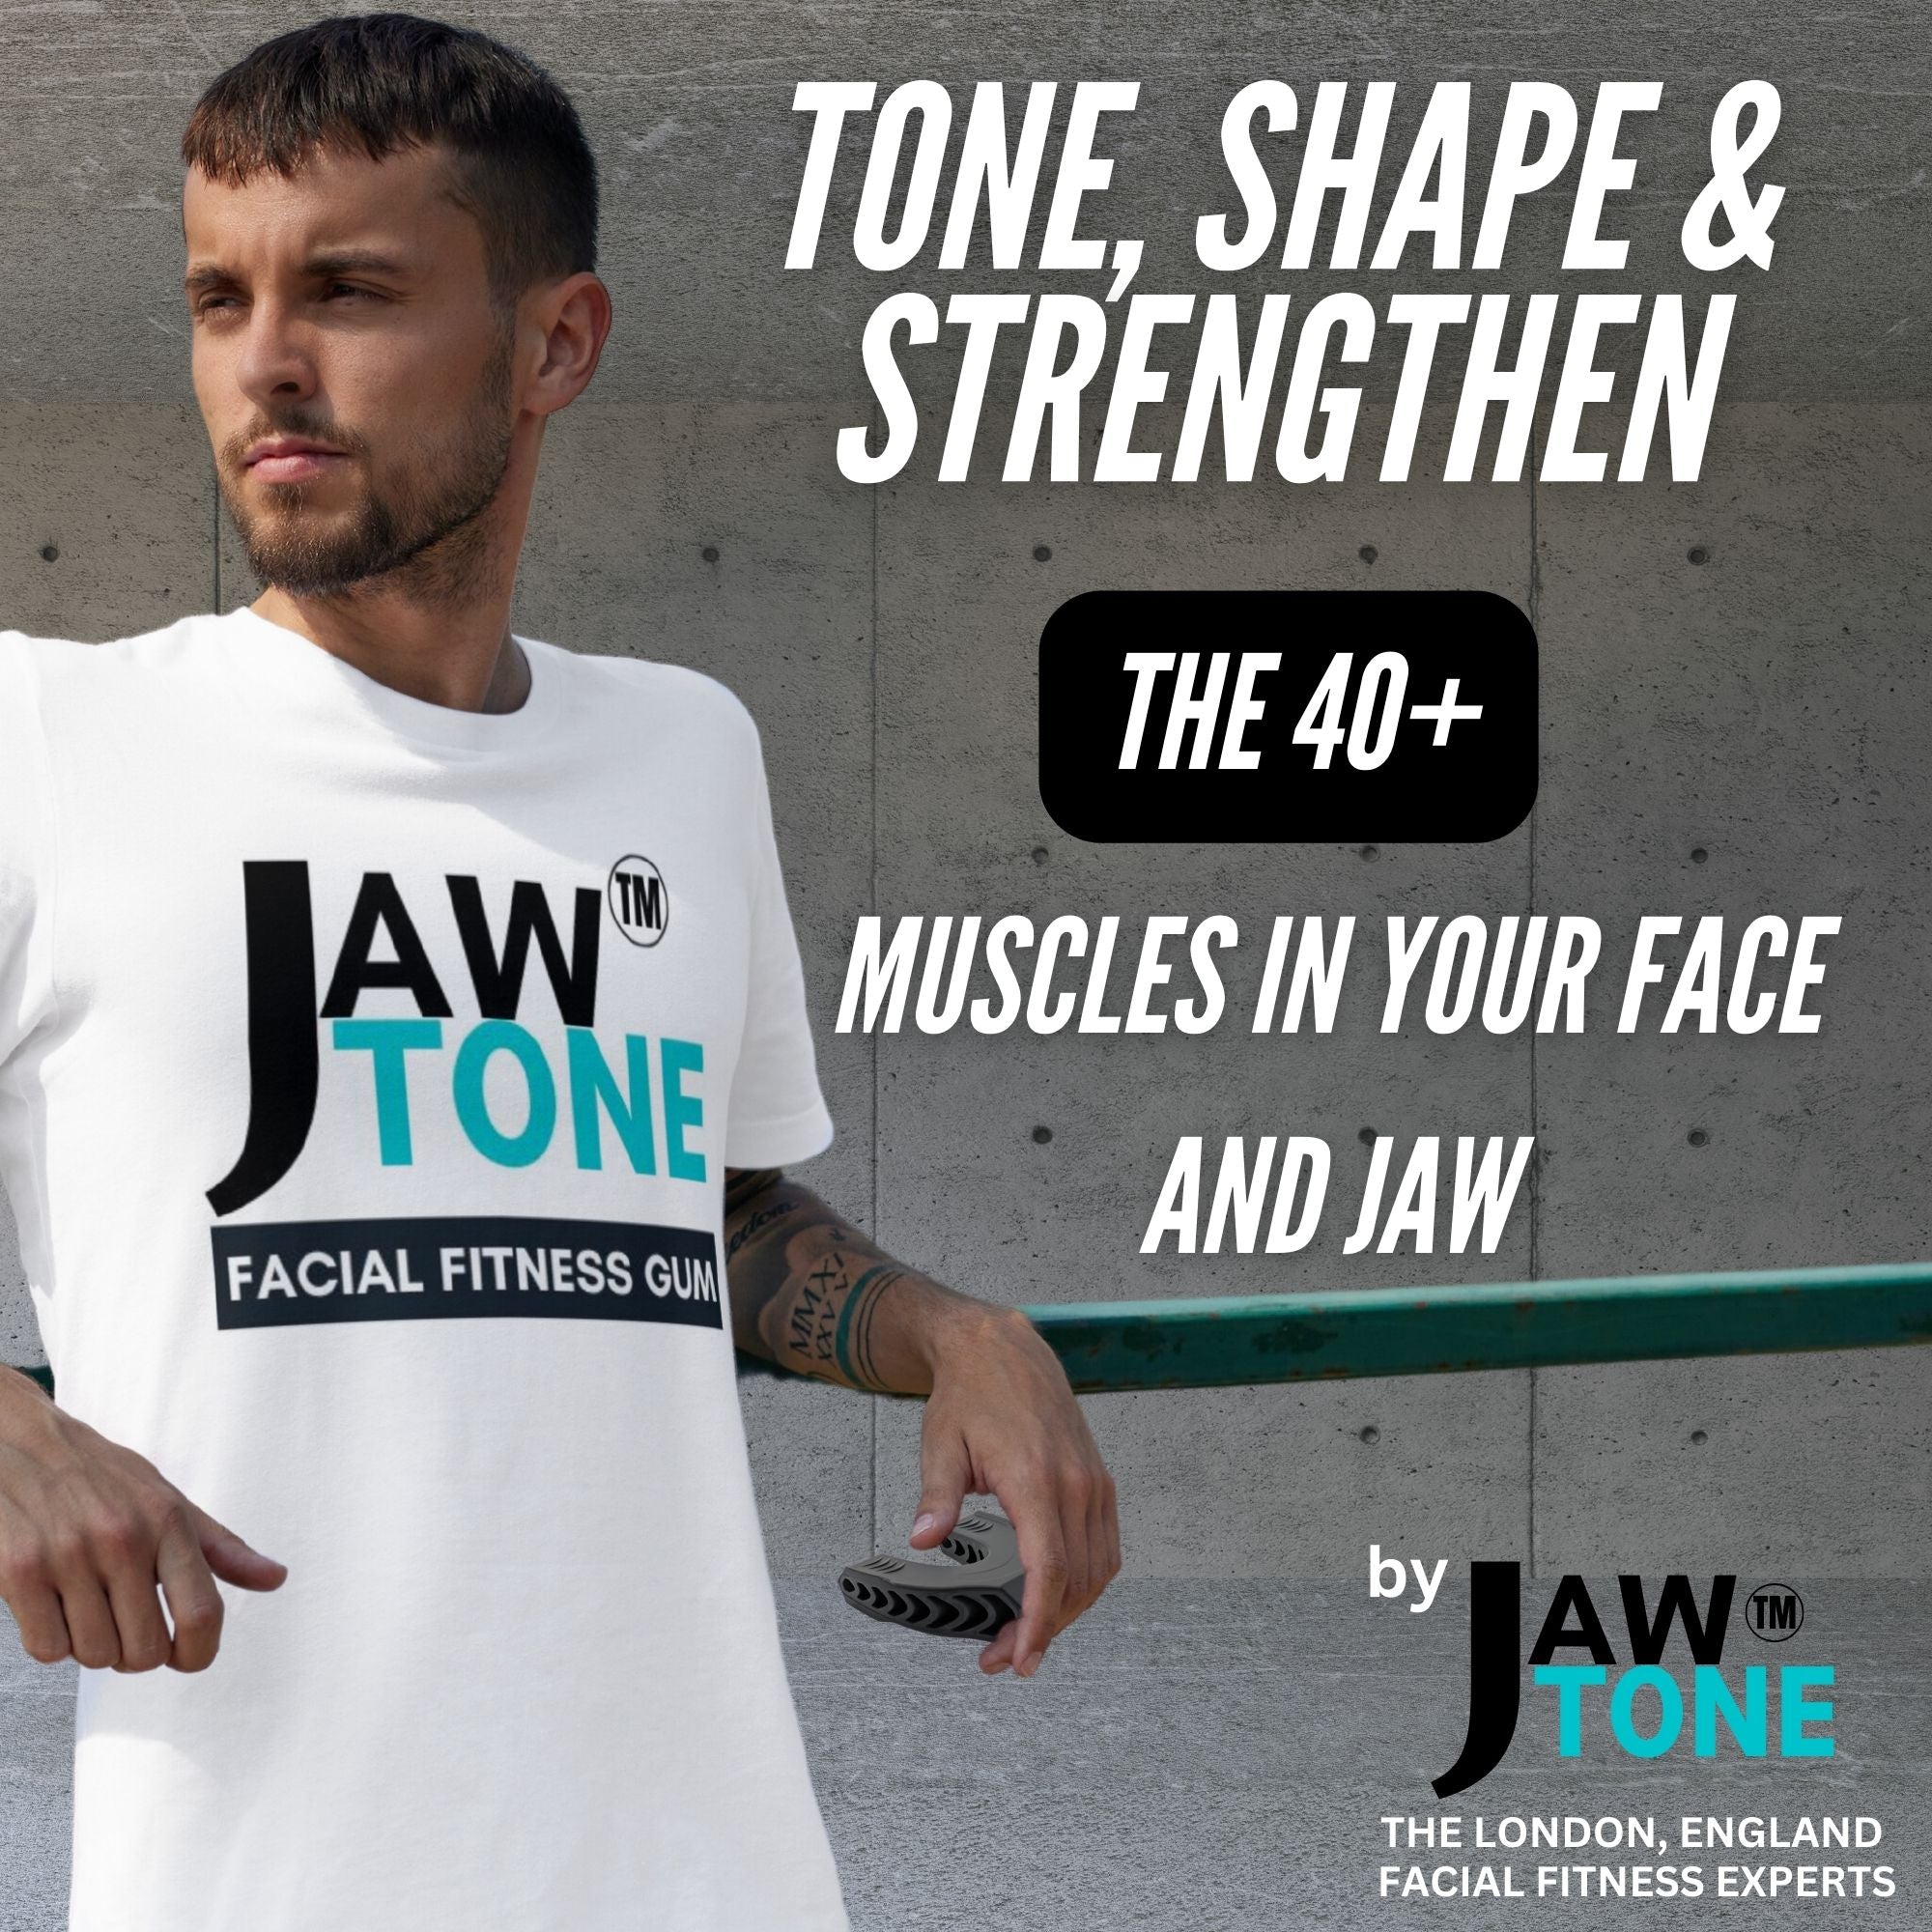 JAWLINER® Fitness Chewing Gum - Mint - For a Strong Chiseled Jawline